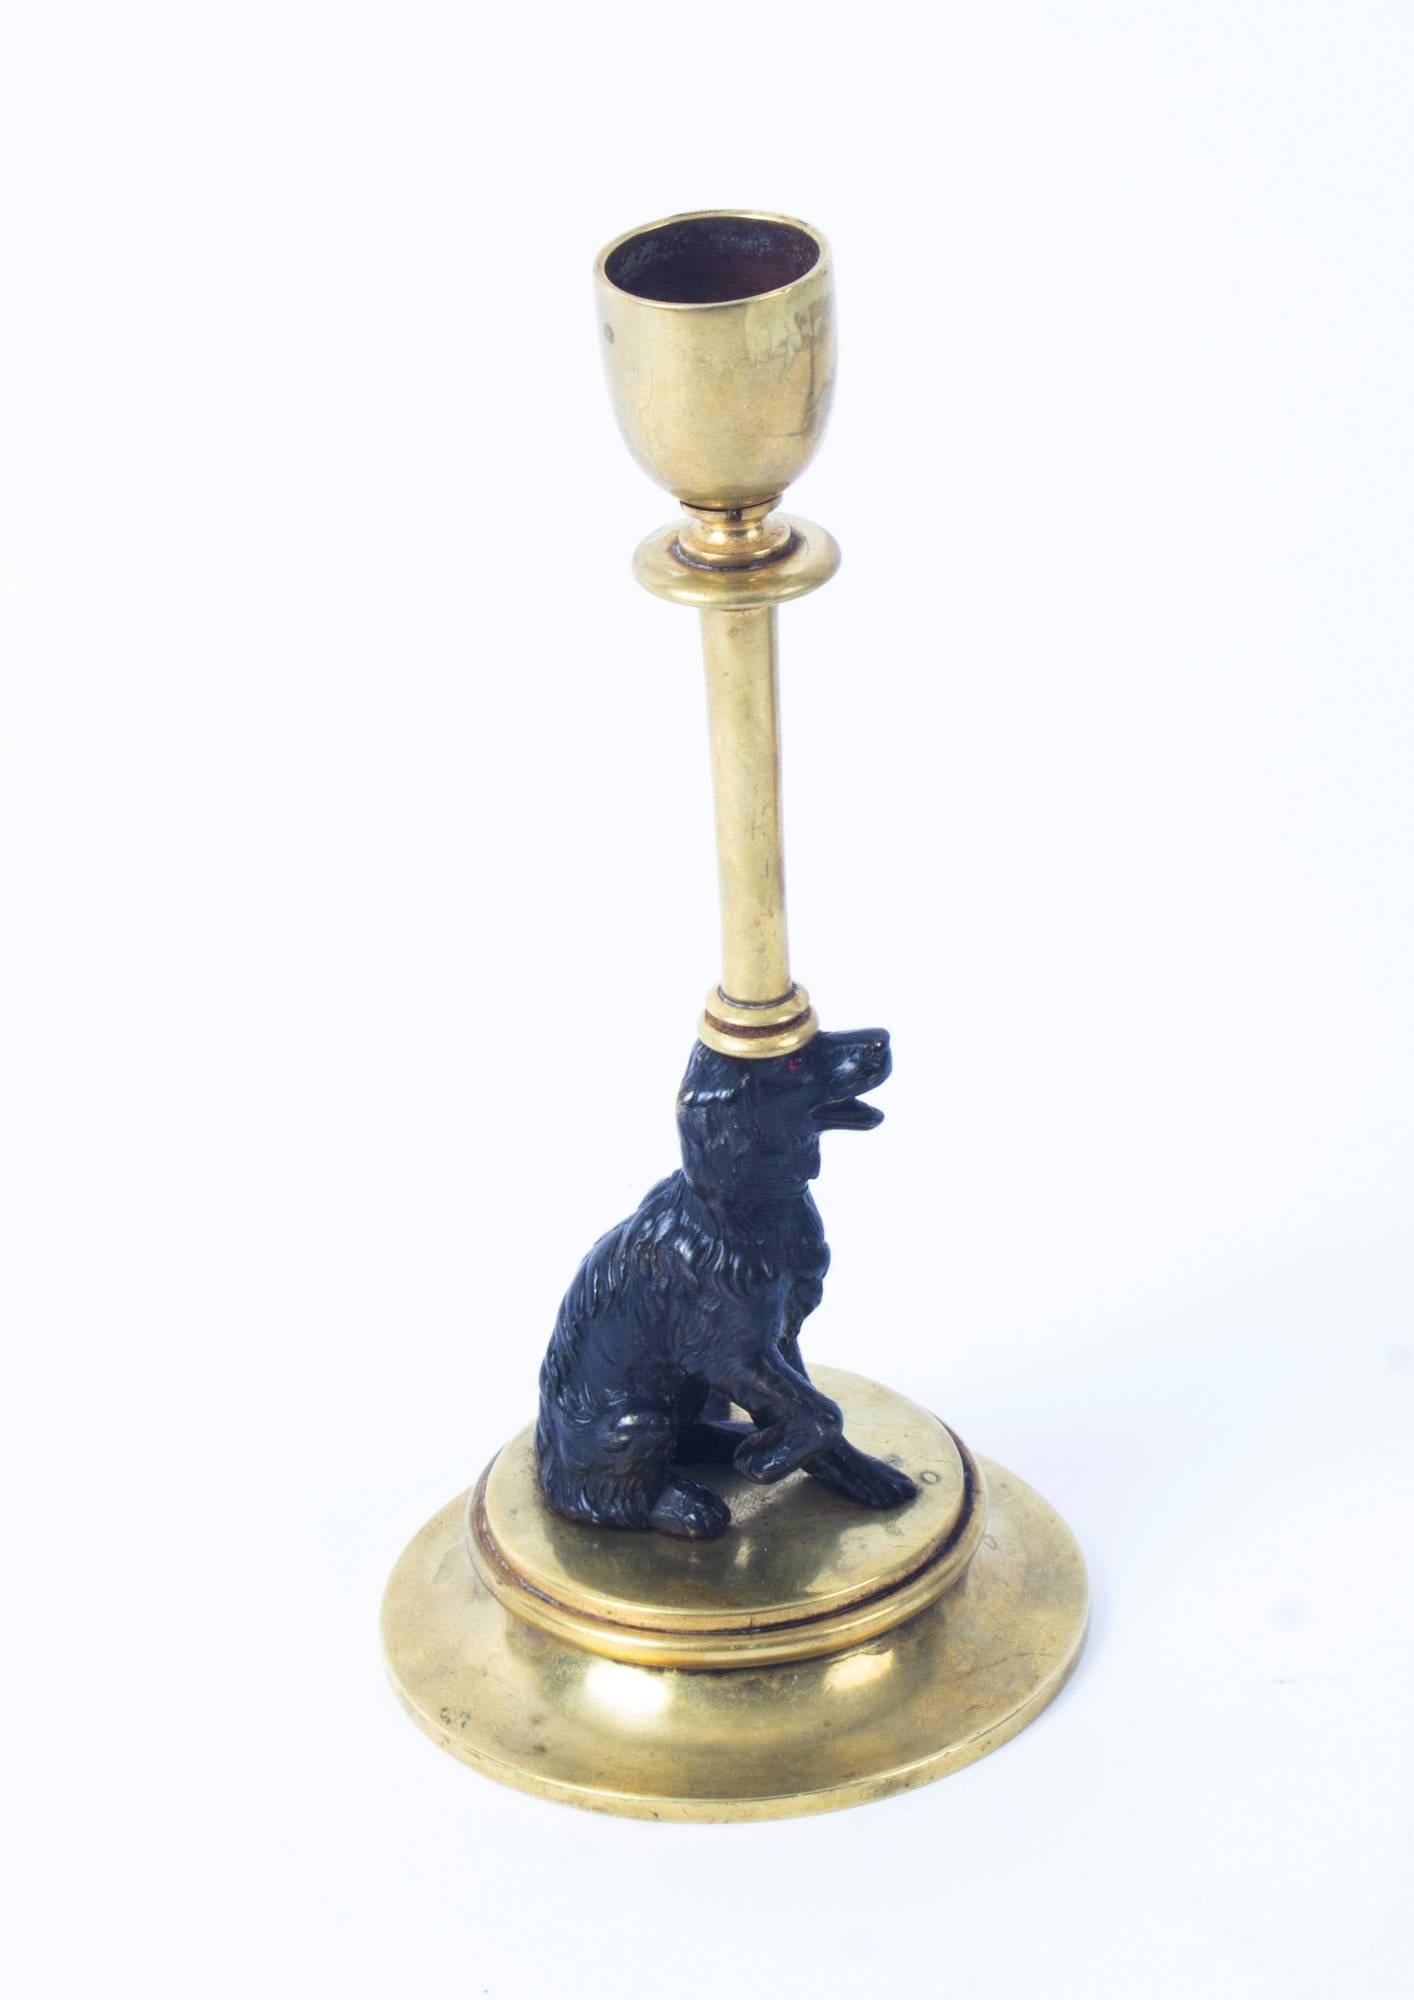 This is a delightful antique pair of 19th century French bronze Spaniel candlesticks, circa 1870 in date.

The candlesticks feature dark patinated and polished bronze spaniels,

Each has an annular sconces on a tall stem, supported by a seated